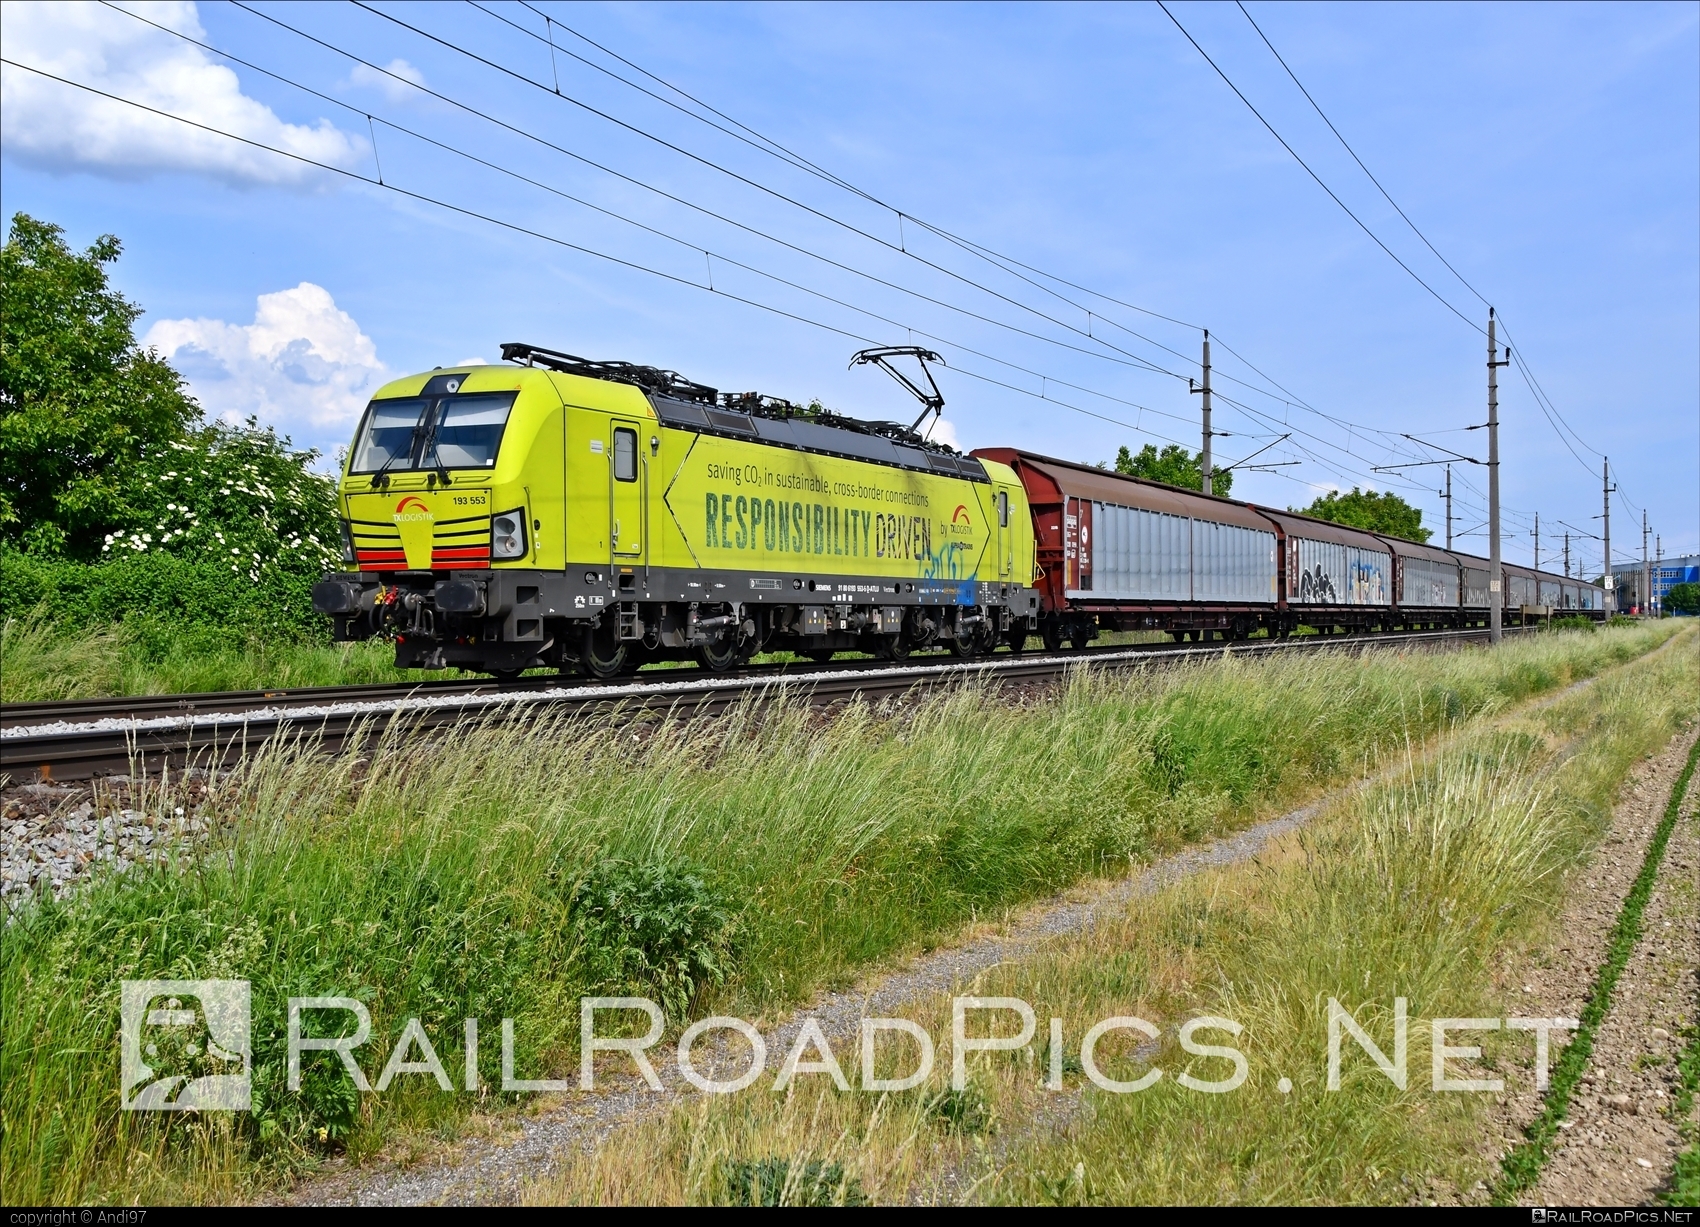 Siemens Vectron MS - 193 553 operated by TXLogistik #alphatrainsluxembourg #siemens #siemensVectron #siemensVectronMS #txlogistik #vectron #vectronMS